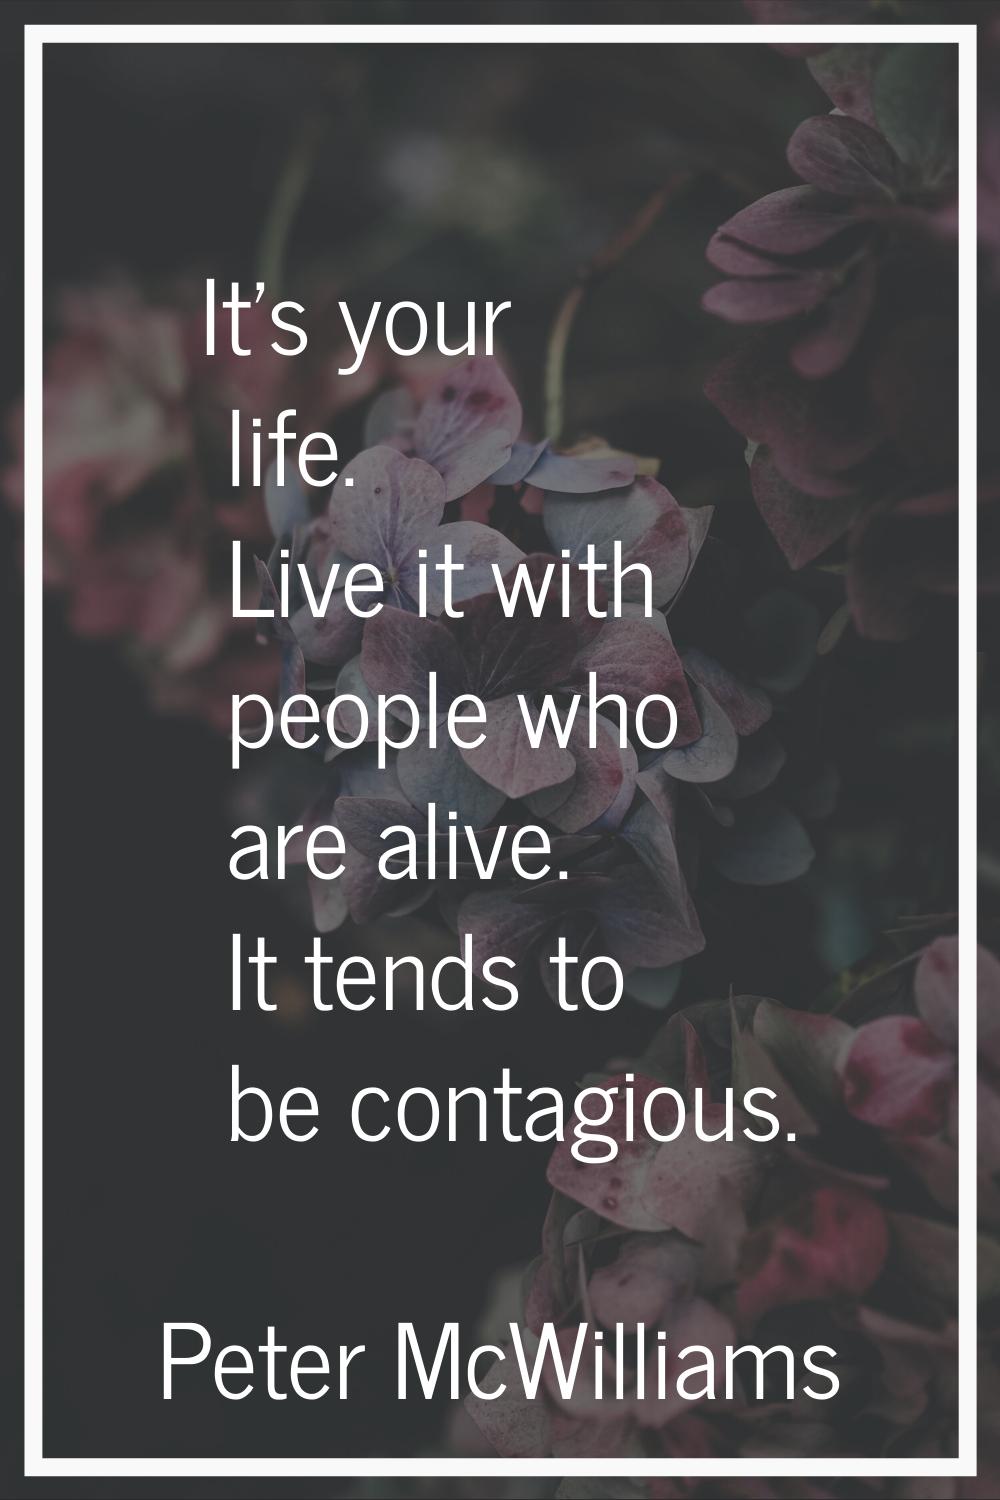 It's your life. Live it with people who are alive. It tends to be contagious.